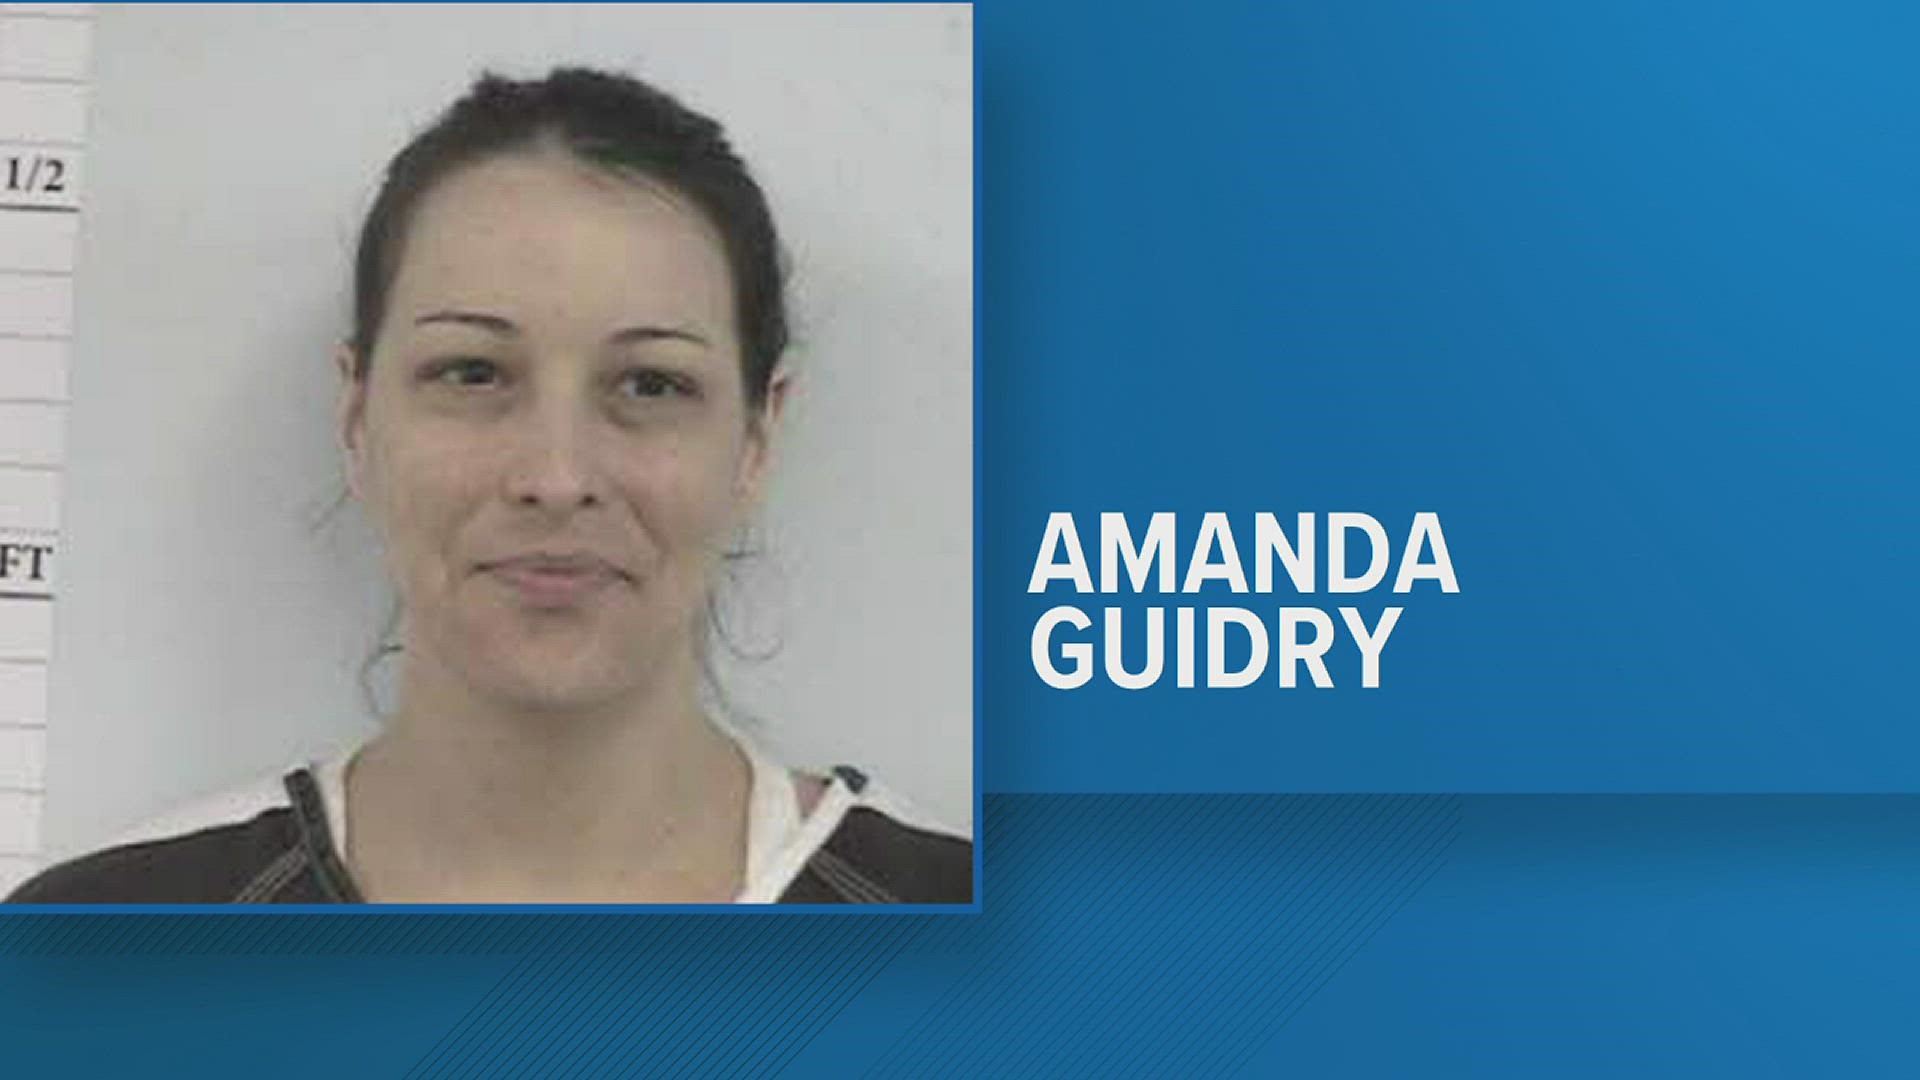 The jury found Amanda Guidry guilty of a lesser charge of causing serious bodily injury to a child.